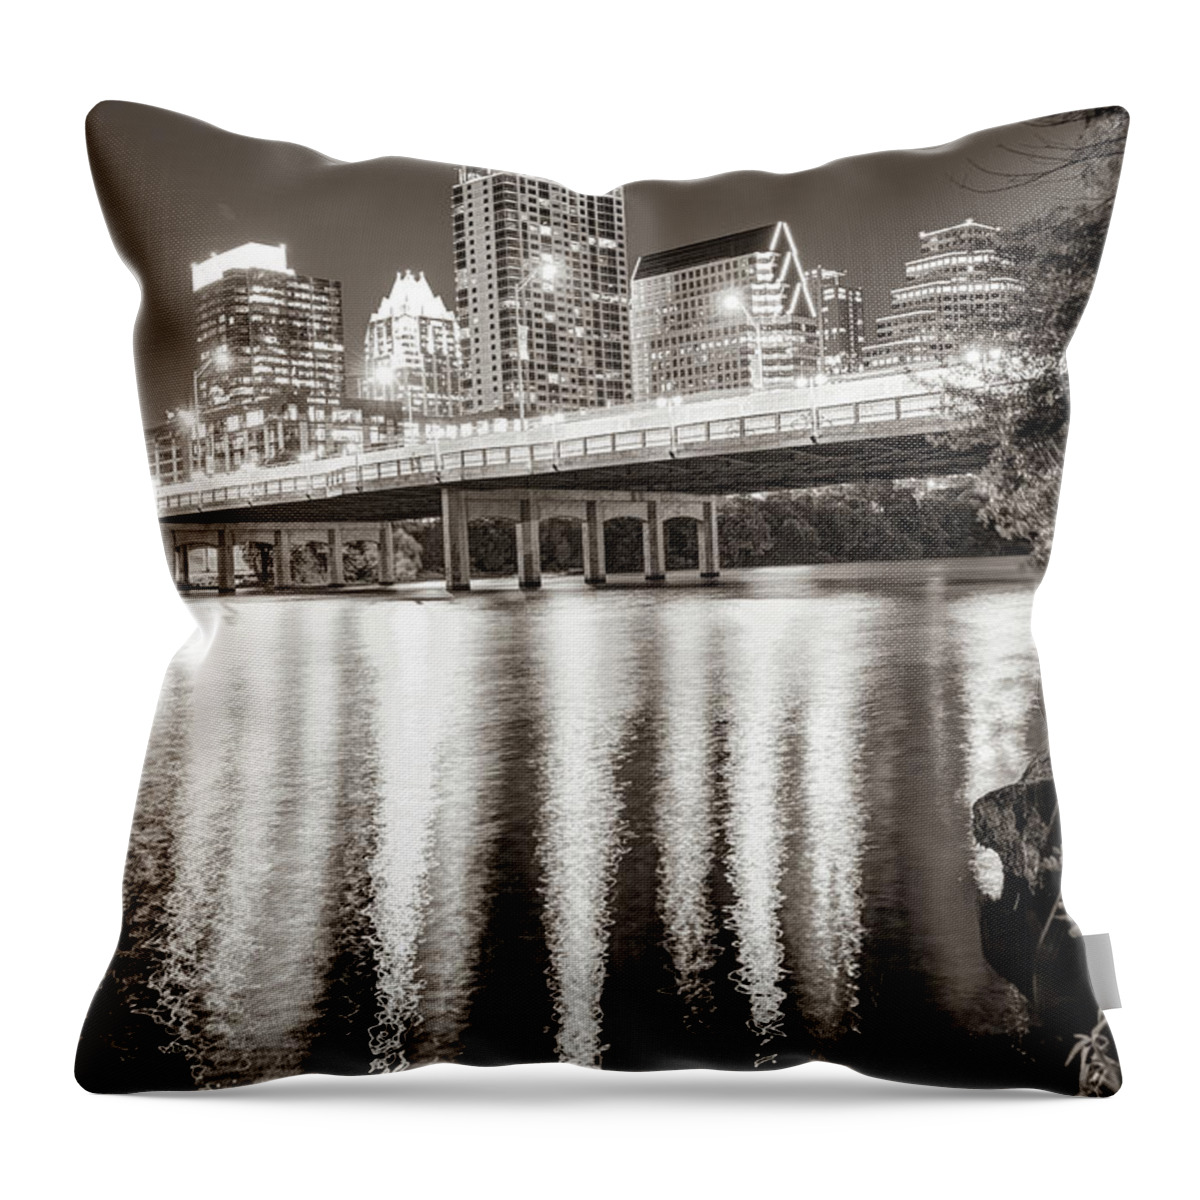 America Throw Pillow featuring the photograph Austin Skyline Over Lady Bird Lake Reflections - Sepia Edition by Gregory Ballos